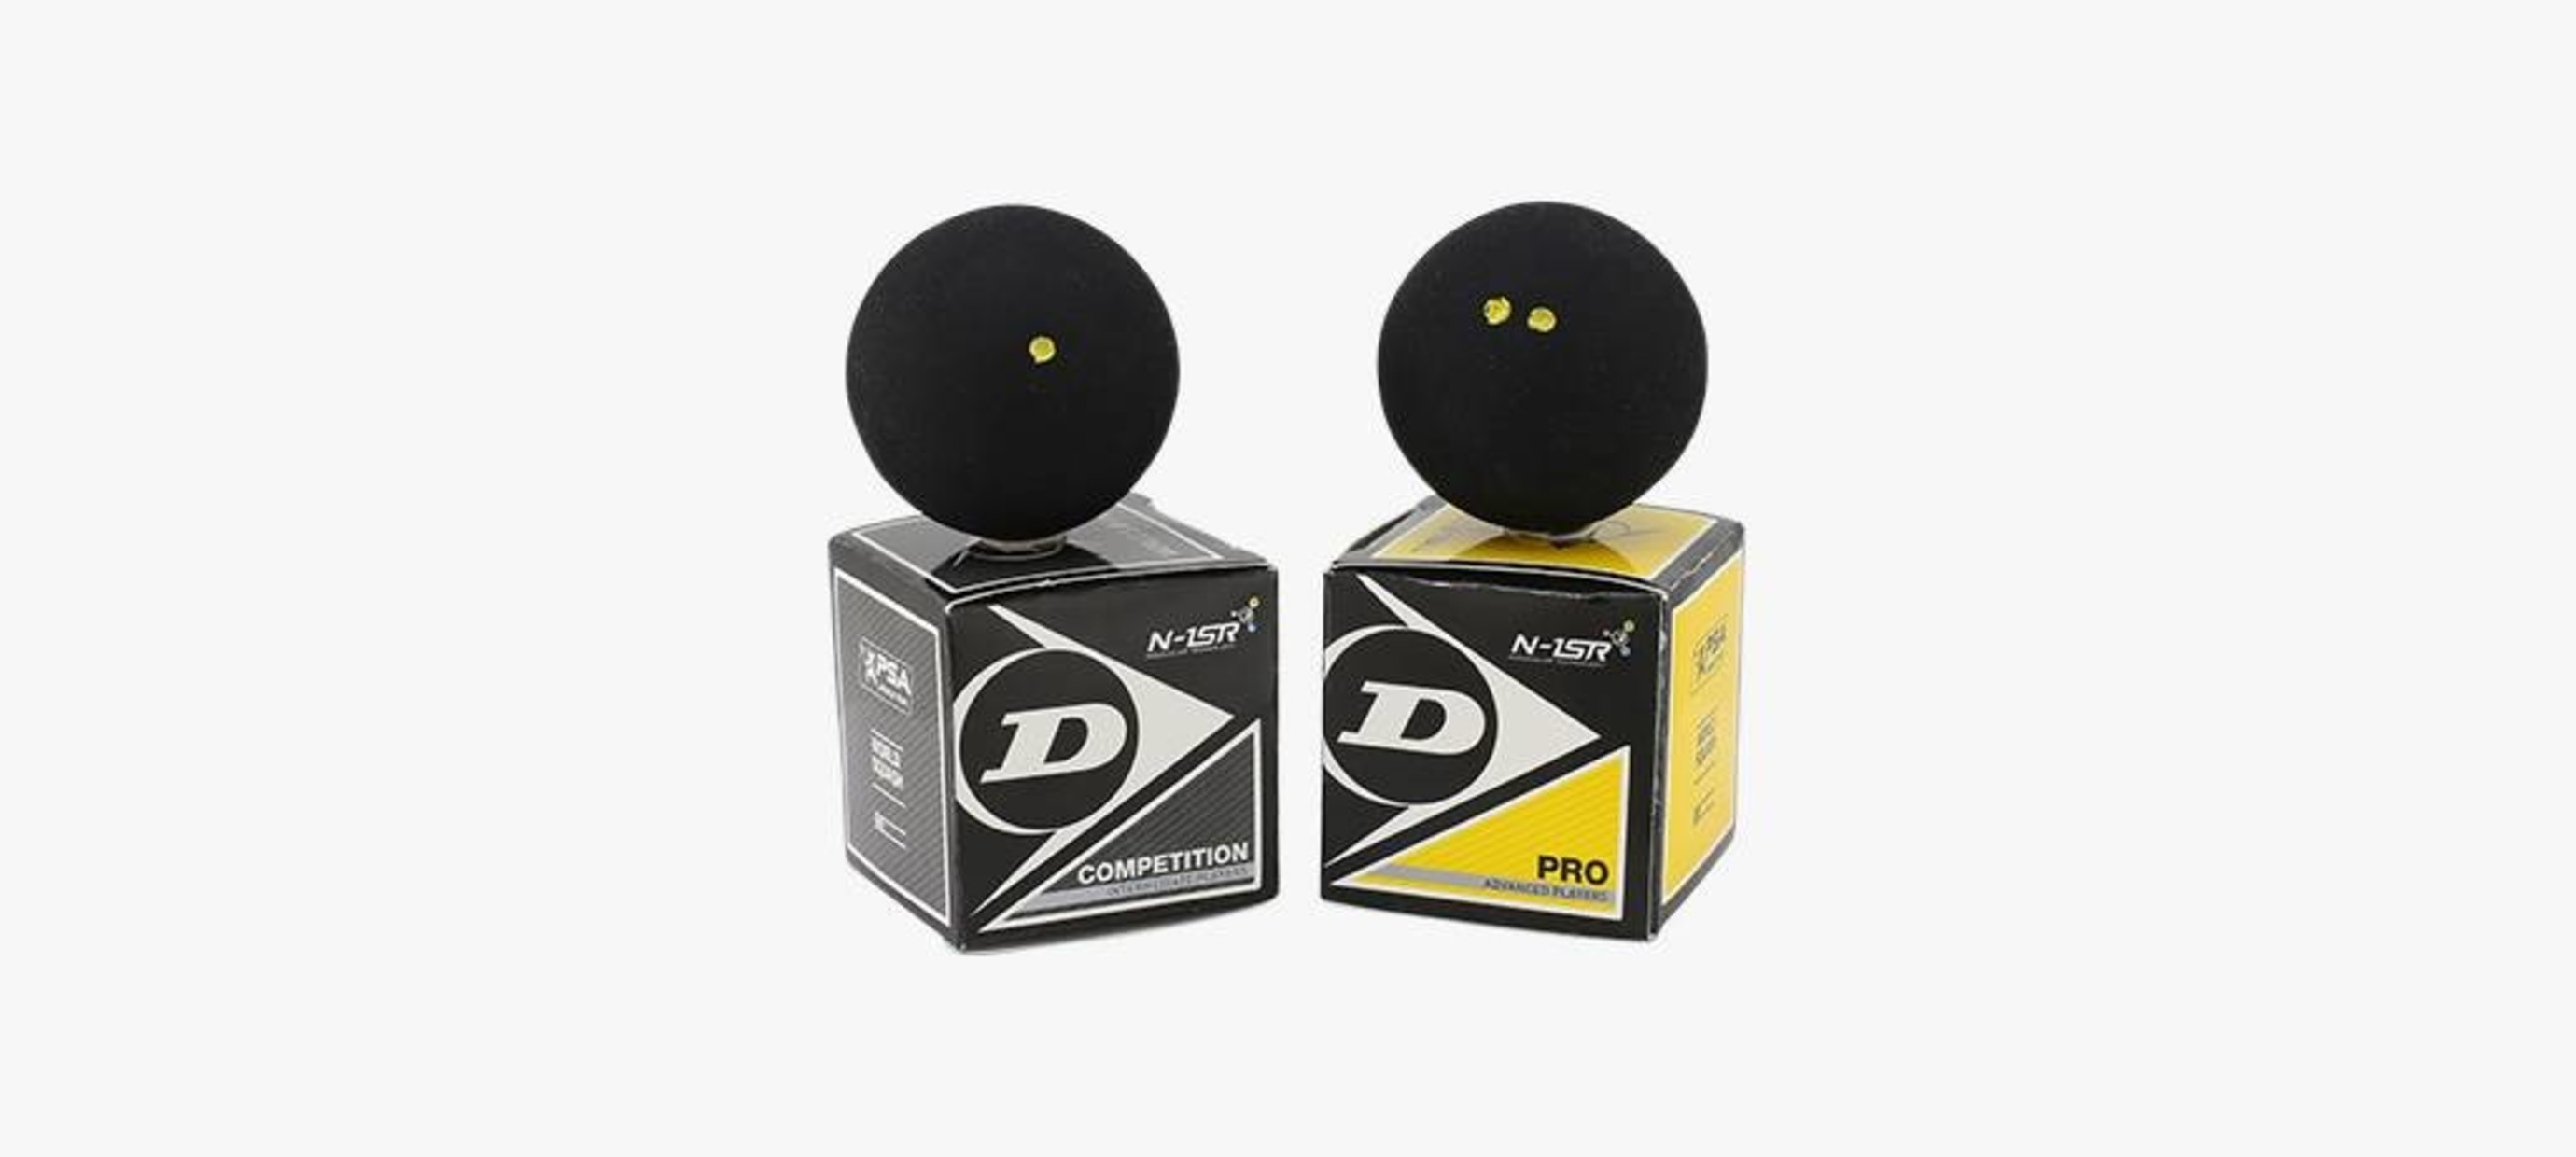 The difference between the Dunlop Pro and the Dunlop Competion Squash balls